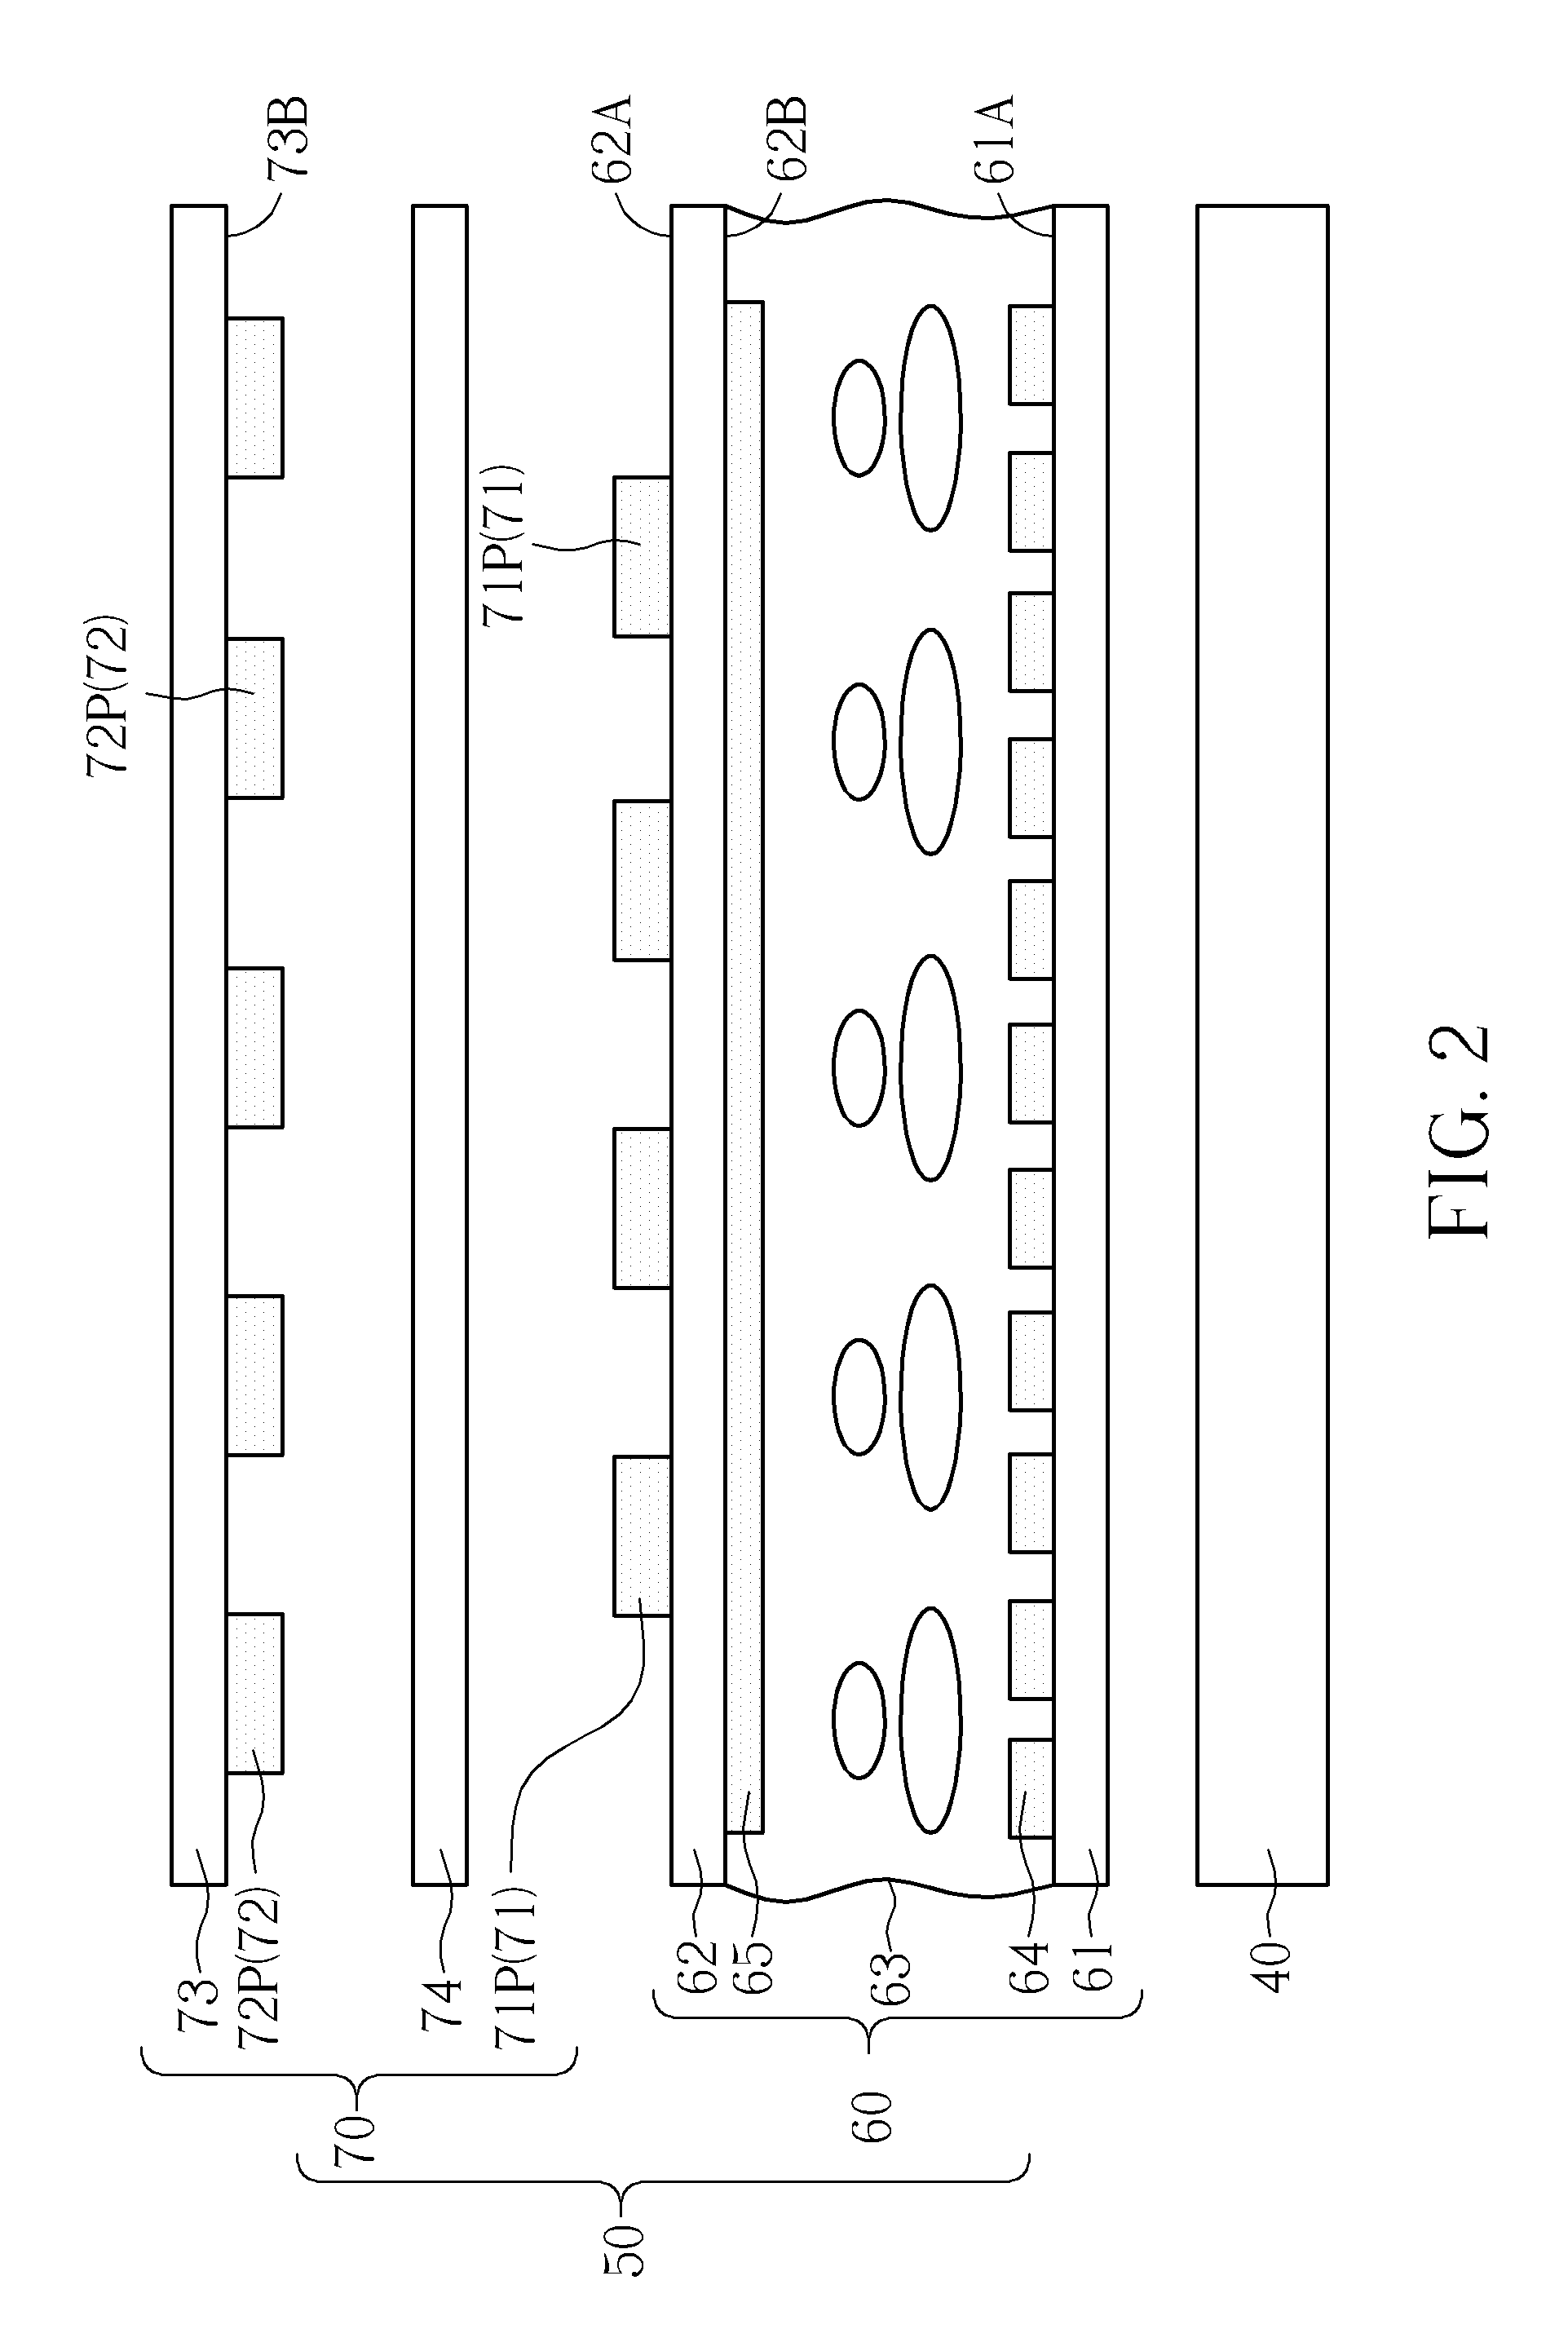 Switchable touch stereoscopic image device